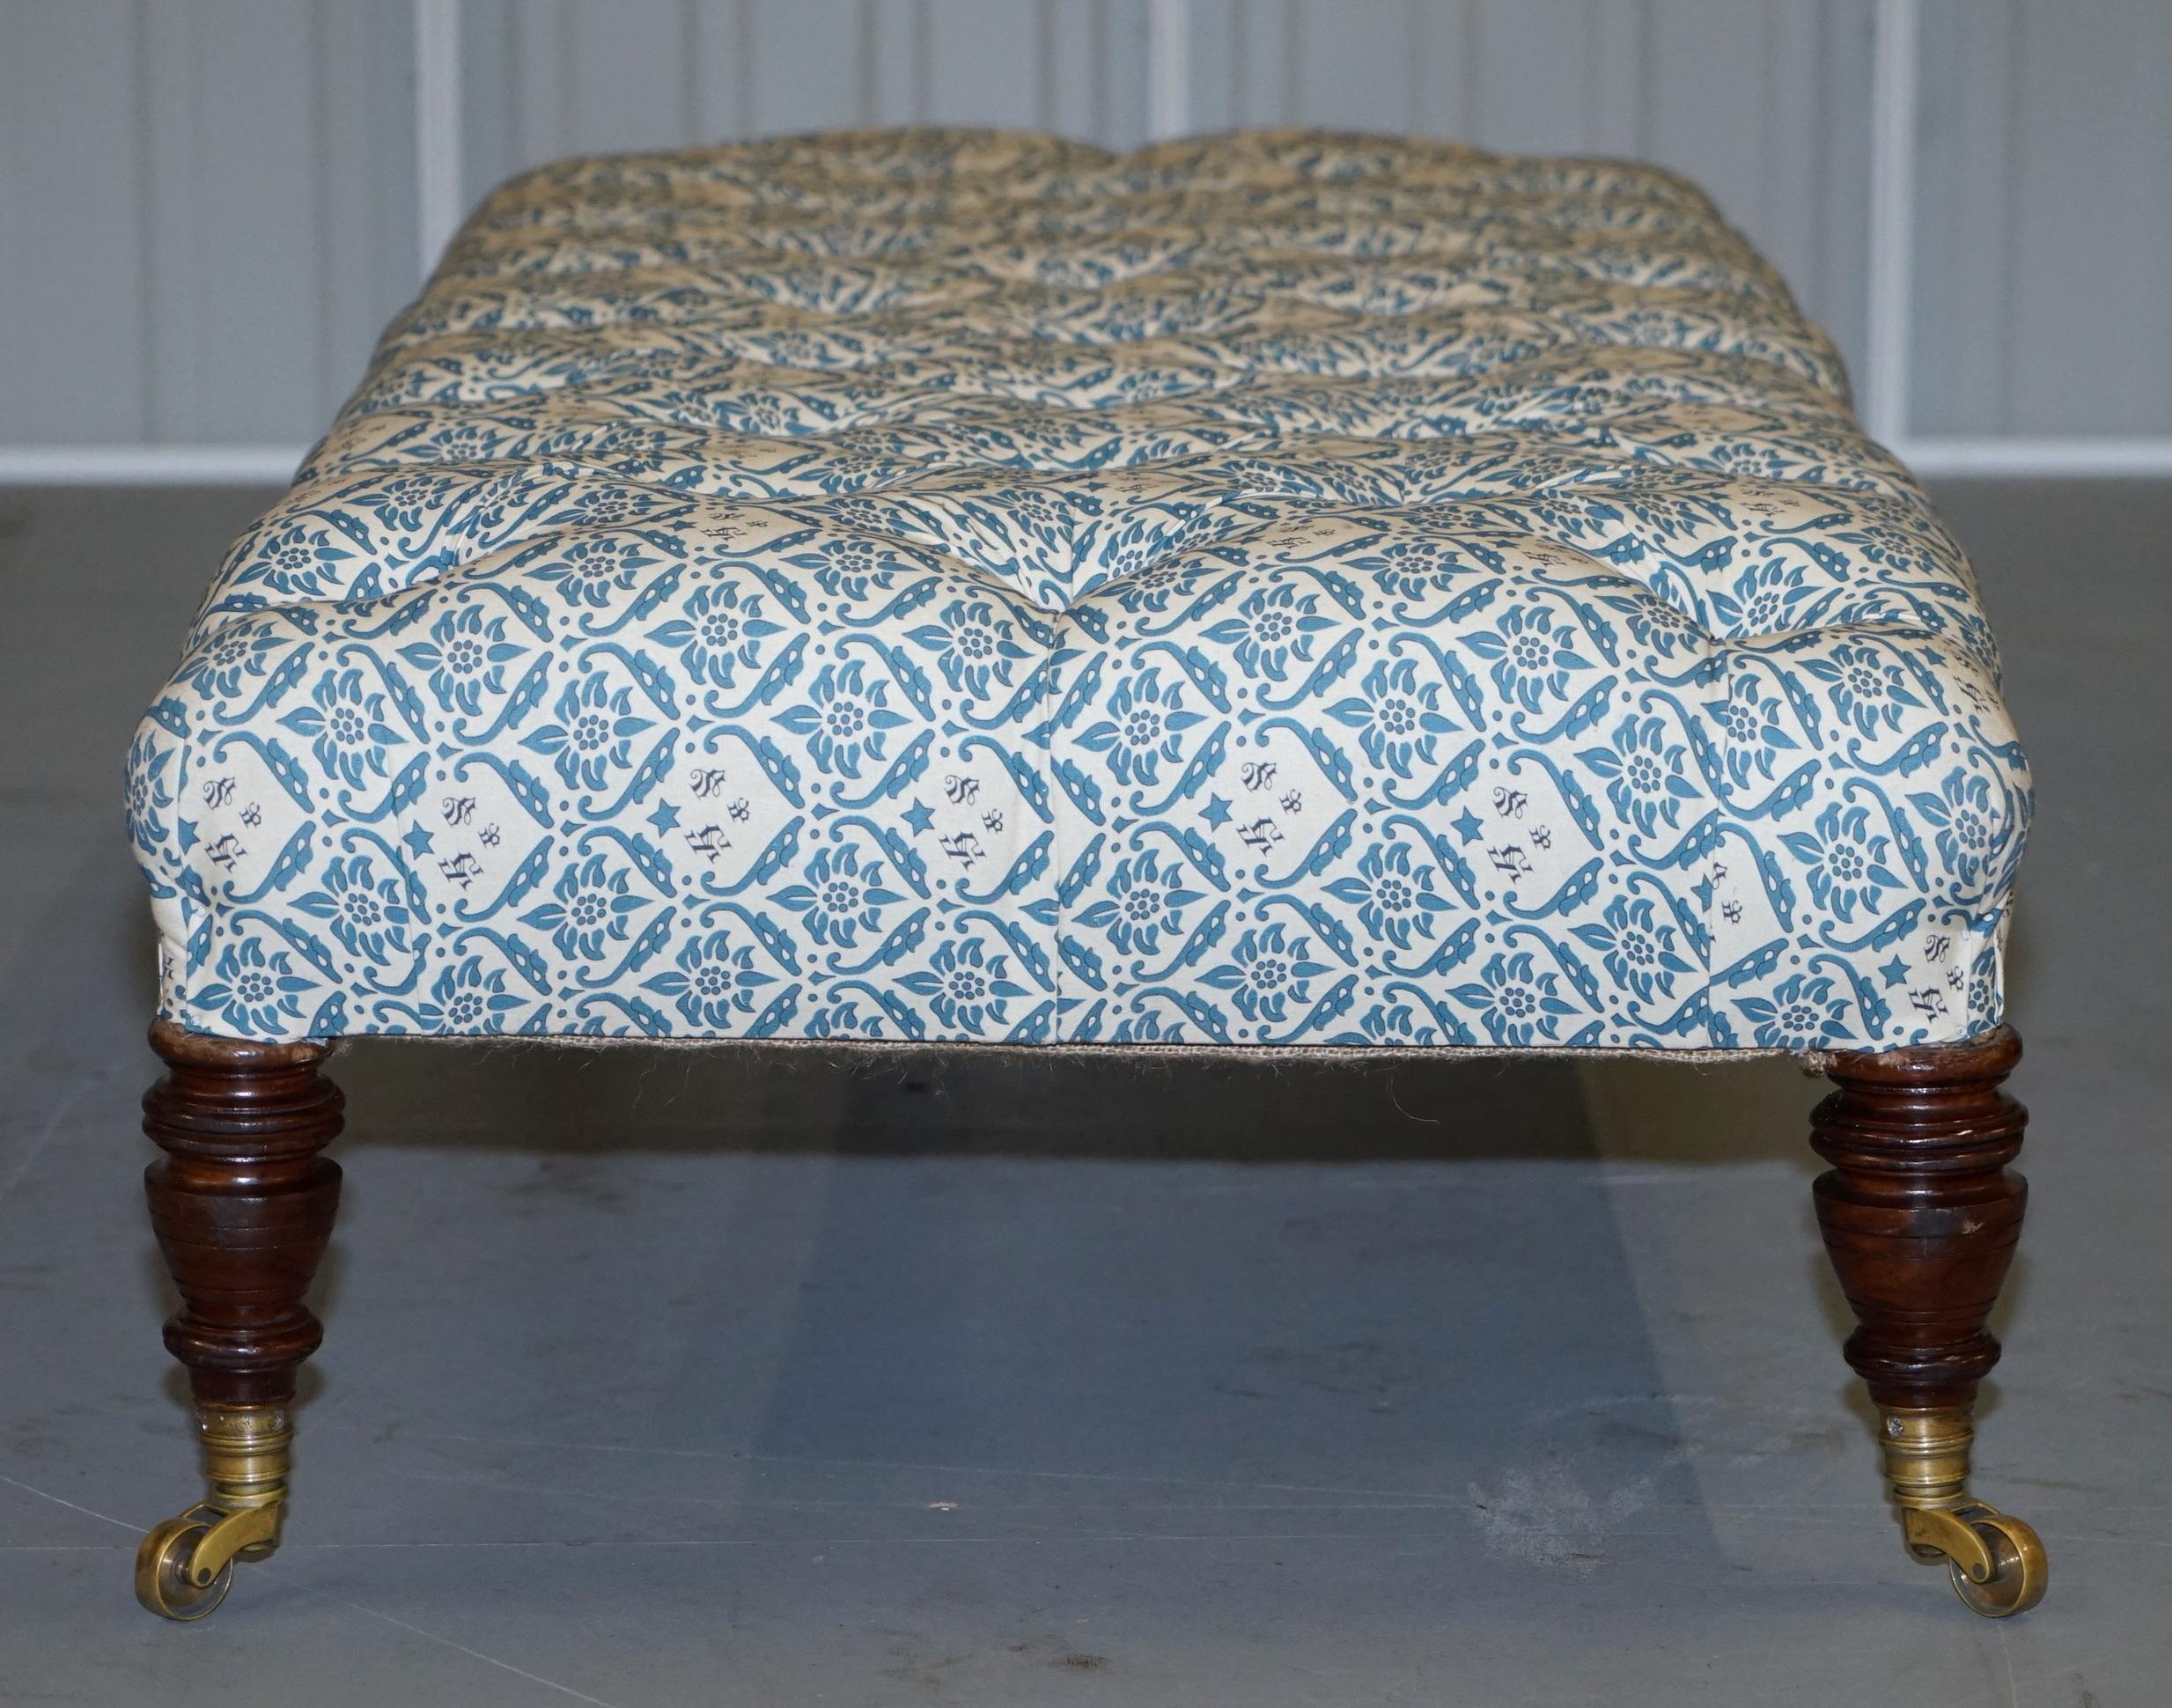 Rare Howard & Son's Oversized Chesterfield Footstool Ticking Fabric Upholstery 1